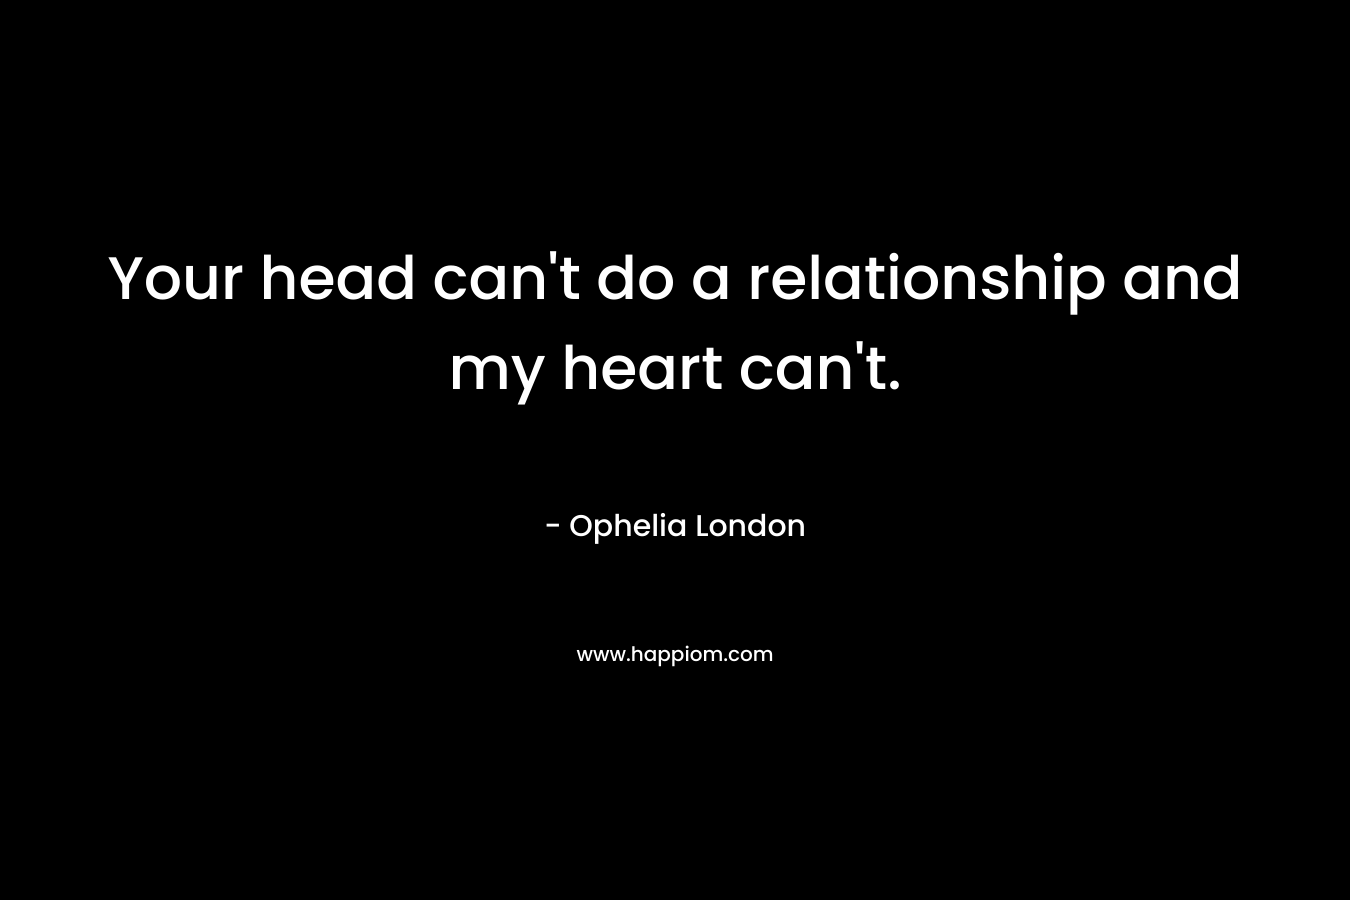 Your head can't do a relationship and my heart can't.